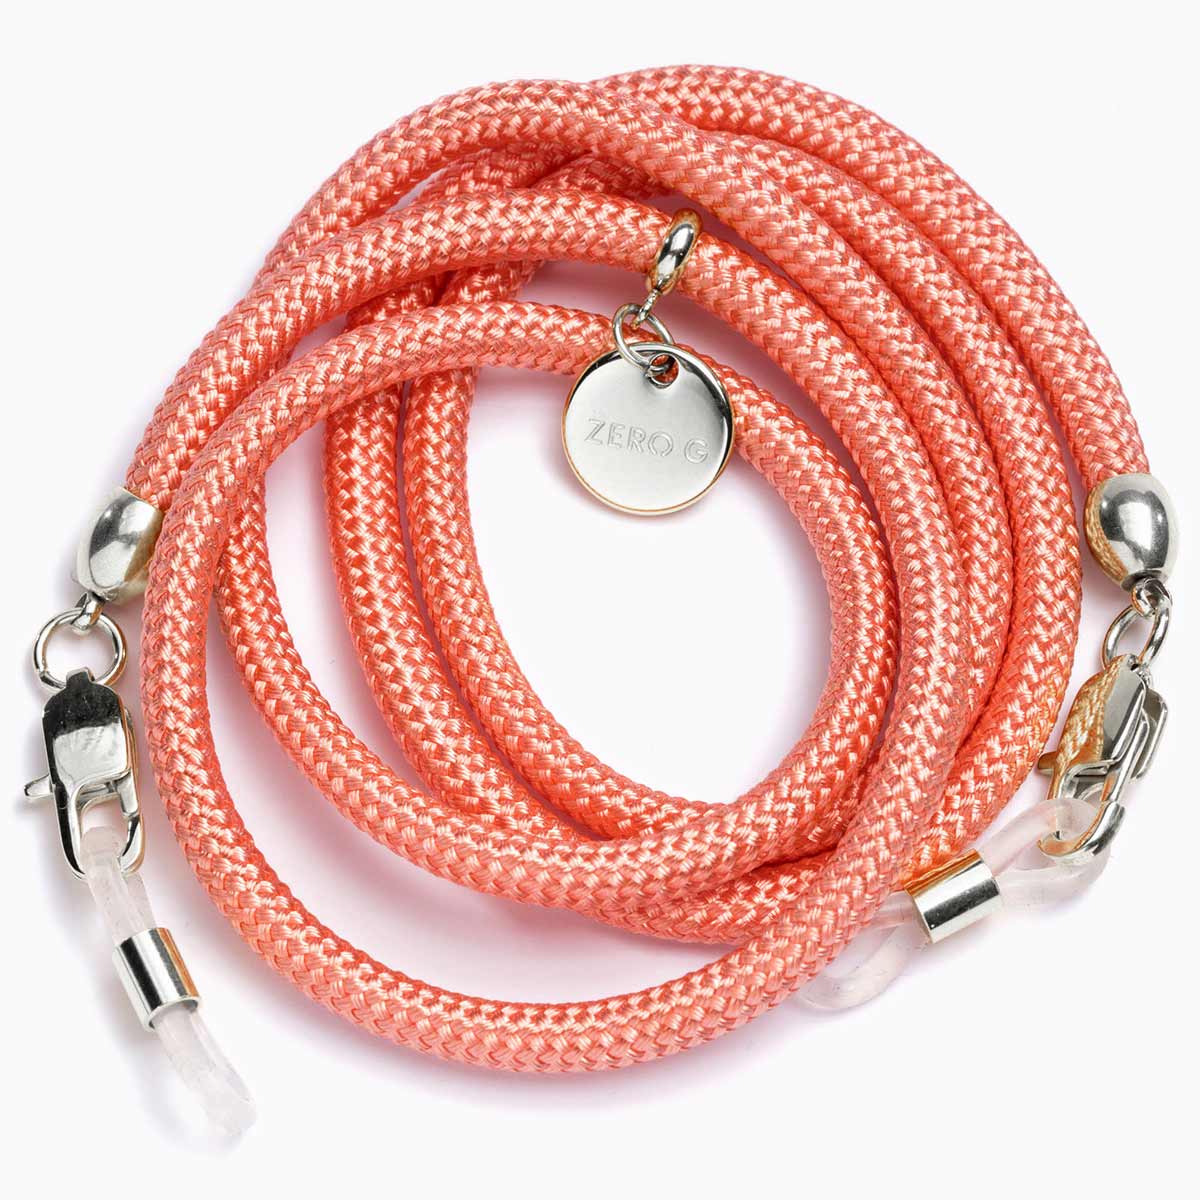 "Glossy Coral" Brillenband (koralle)